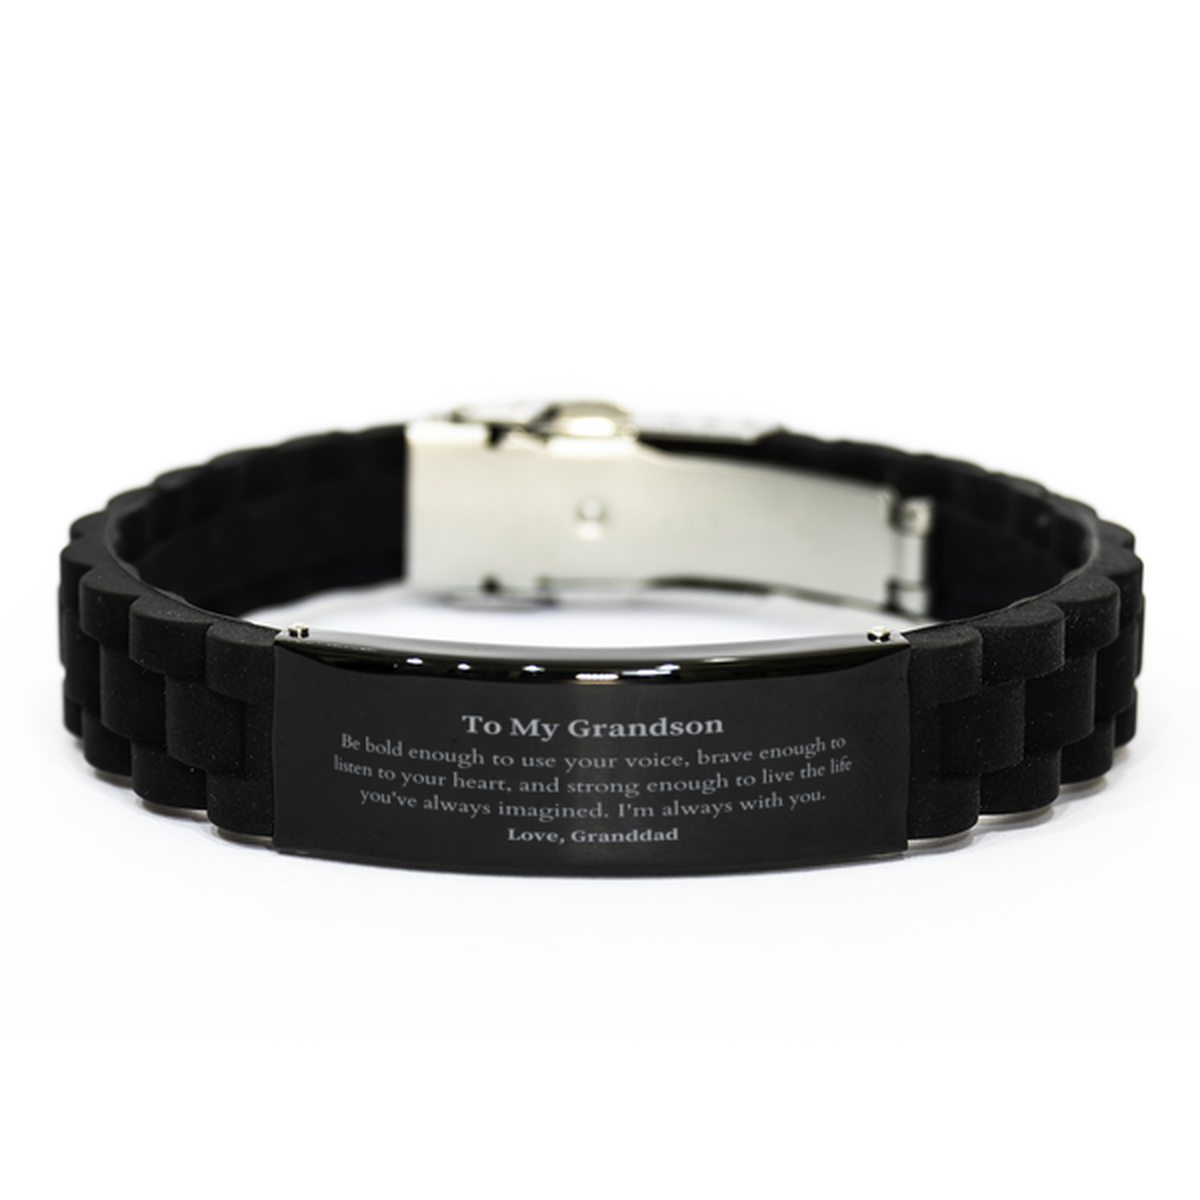 Keepsake Grandson Black Glidelock Clasp Bracelet Gift Idea Graduation Christmas Birthday Grandson from Granddad, Grandson Be bold enough to use your voice, brave enough to listen to your heart. Love, Granddad